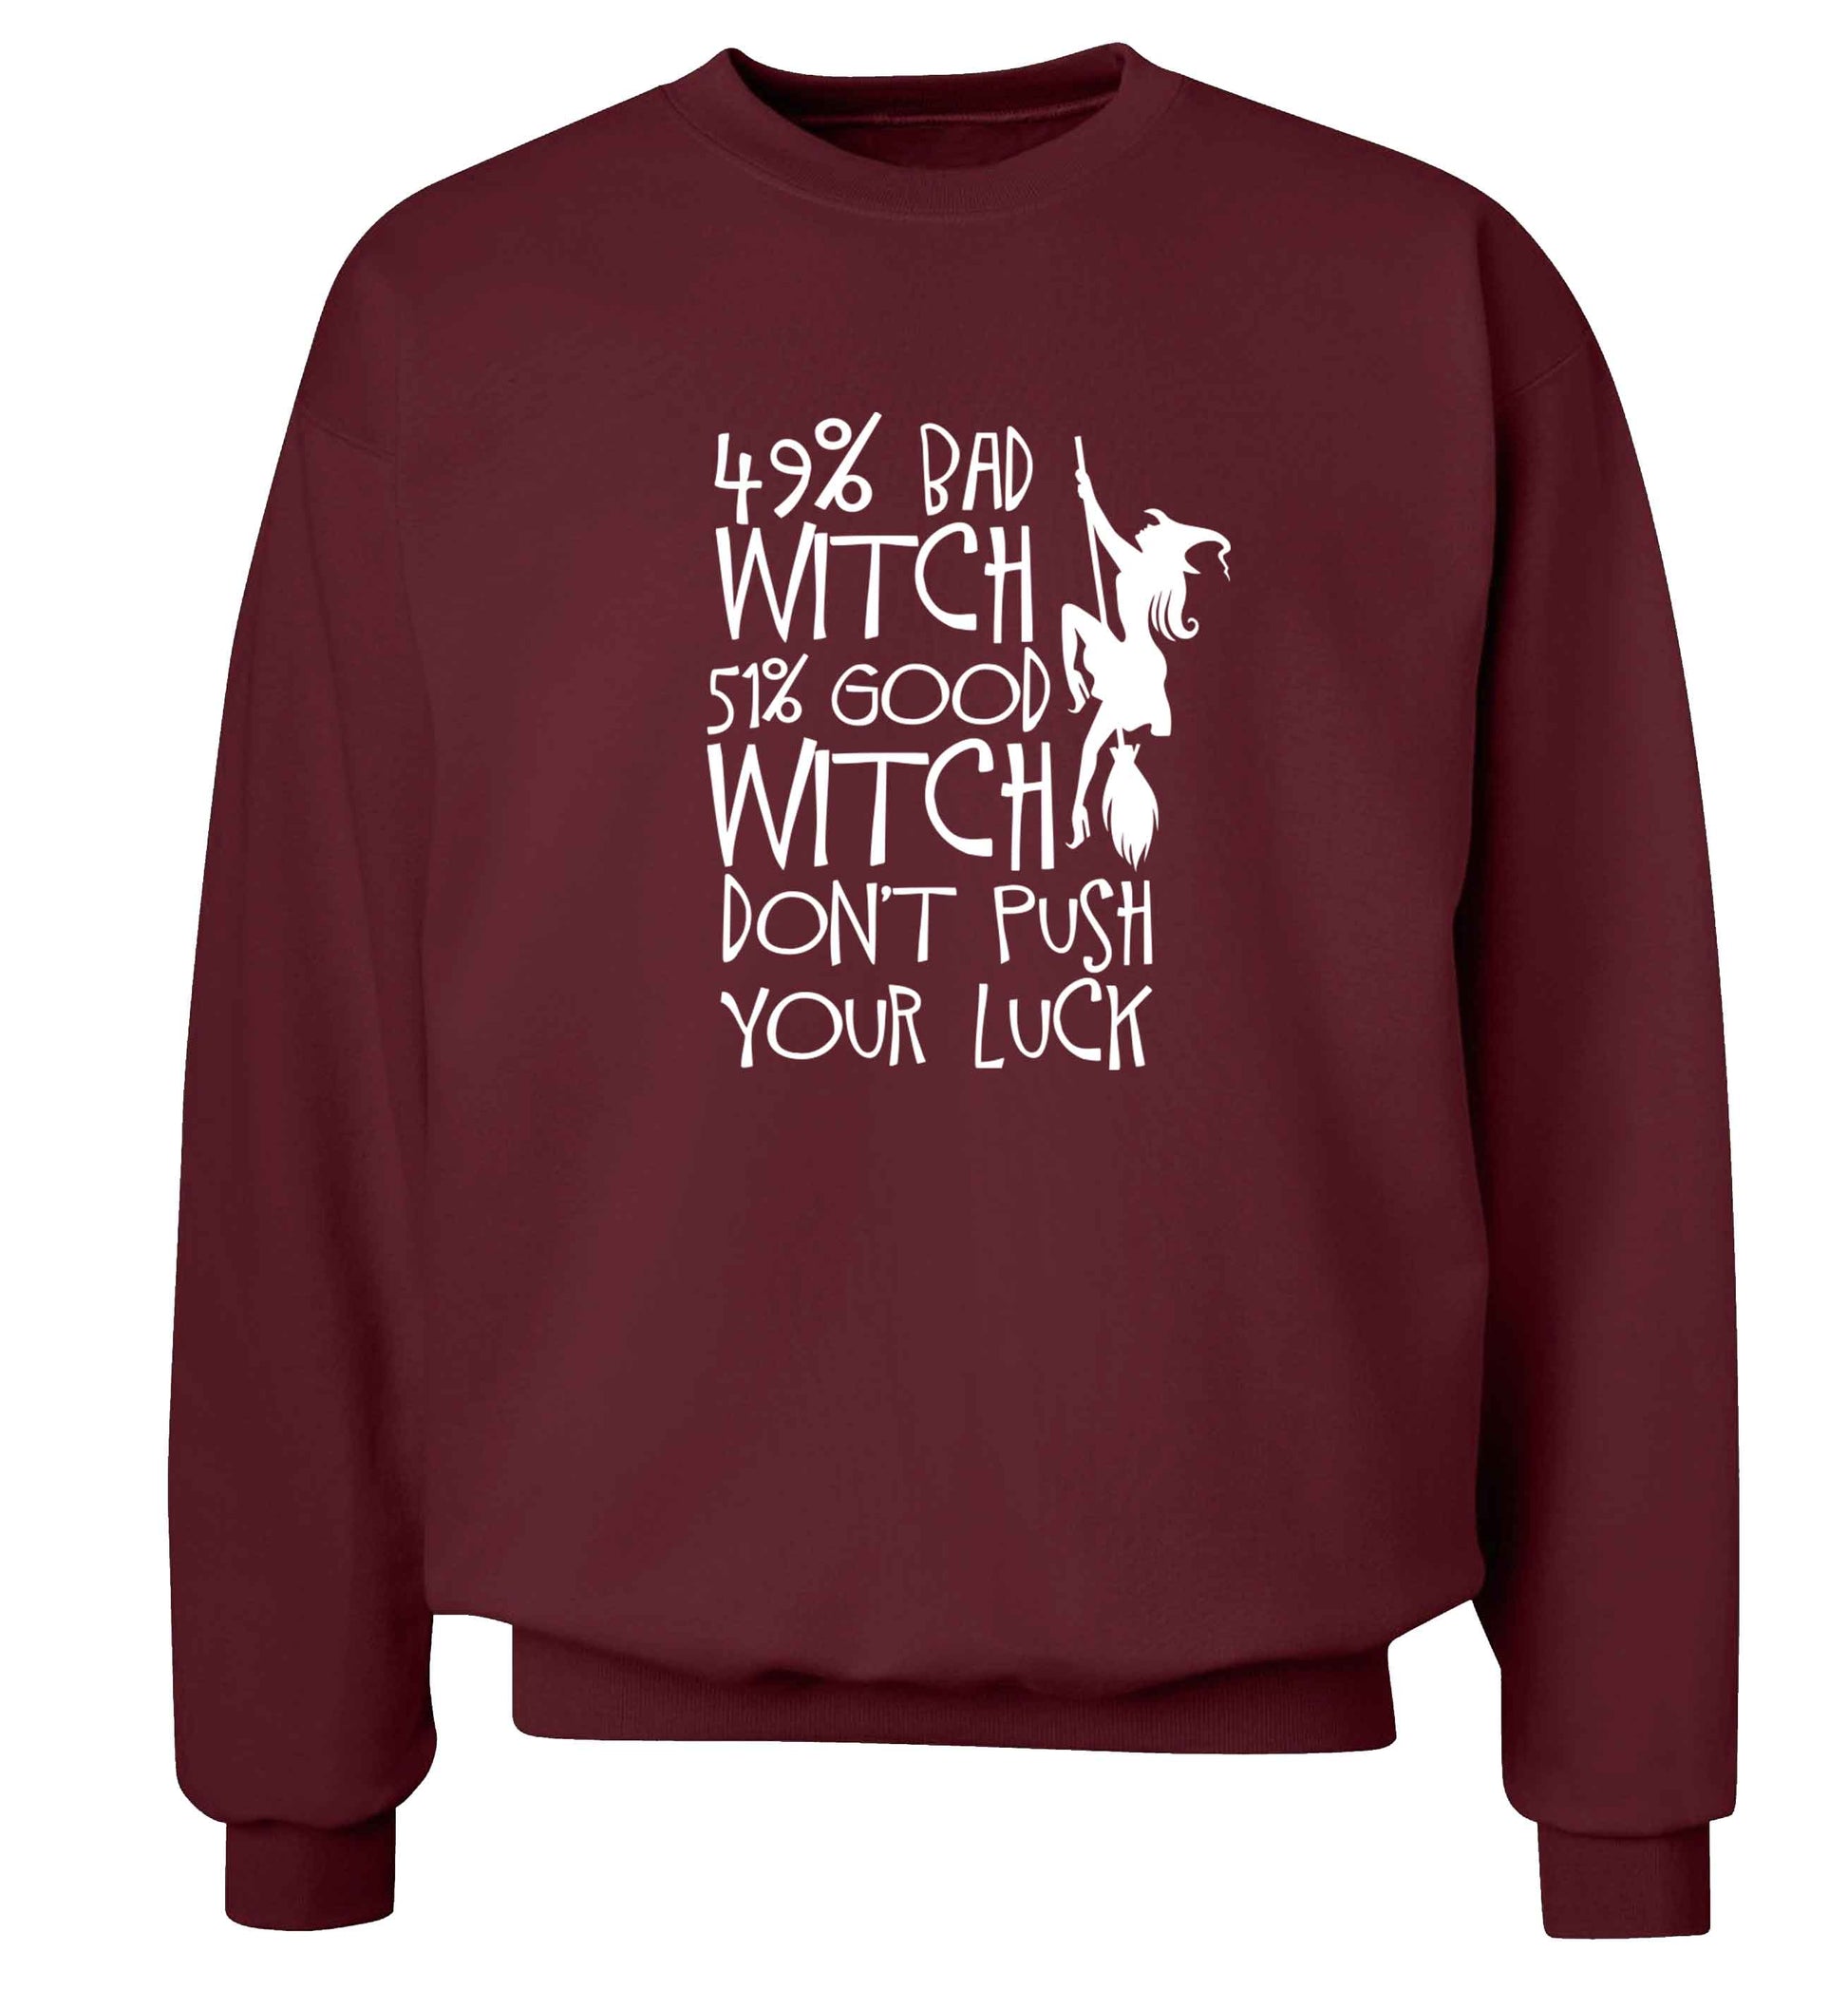 49% bad witch 51% good witch don't push your luck adult's unisex maroon sweater 2XL